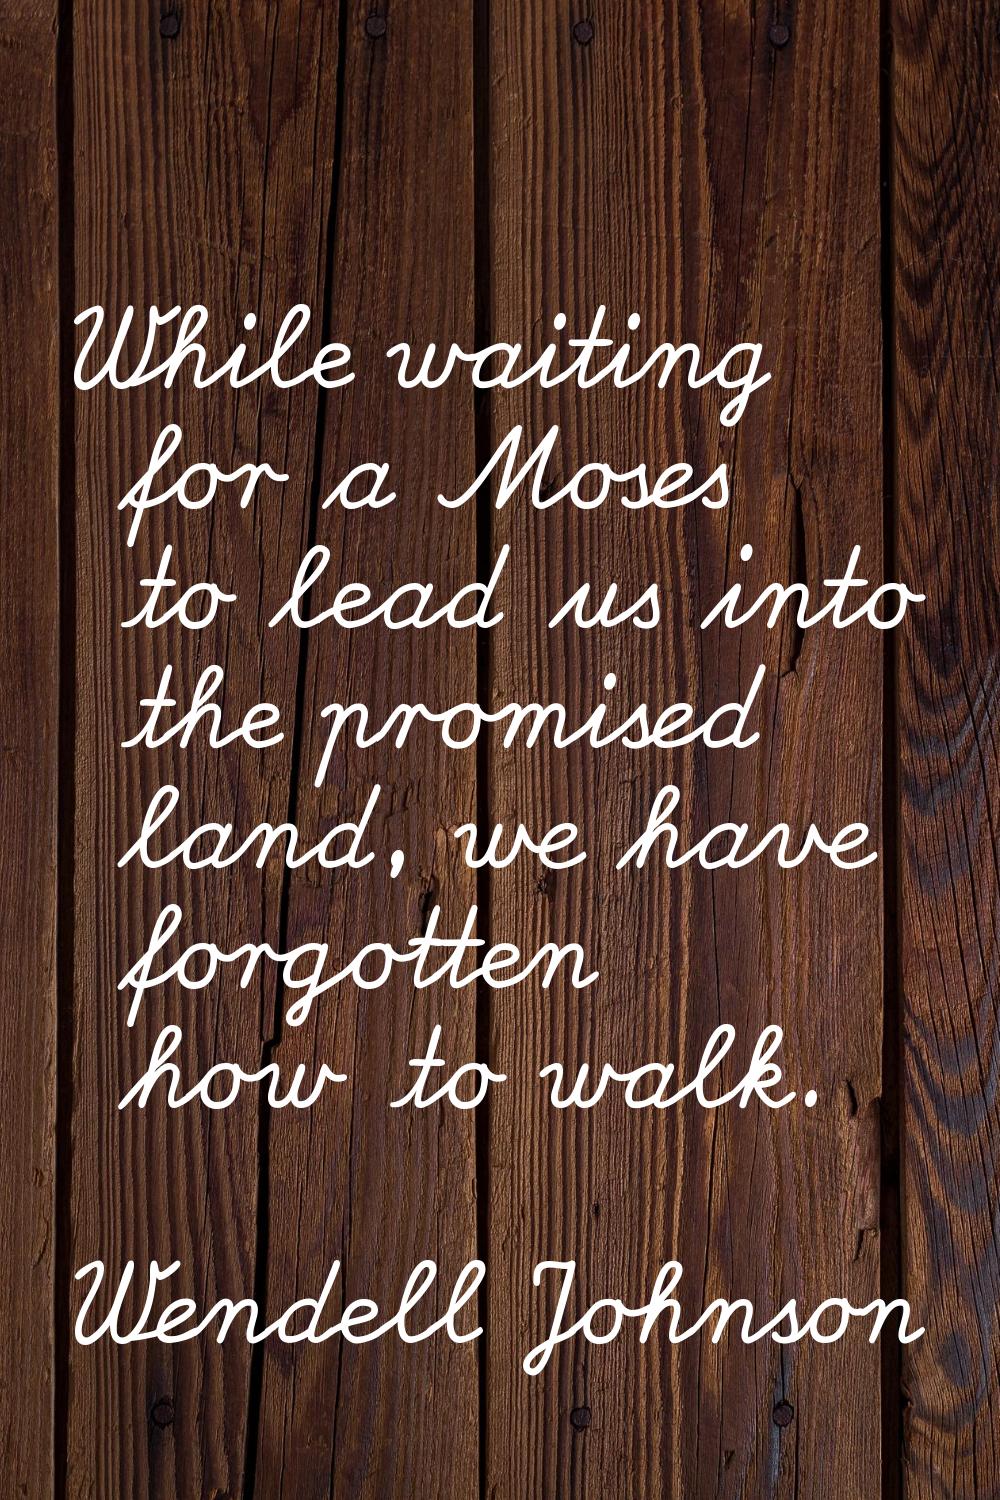 While waiting for a Moses to lead us into the promised land, we have forgotten how to walk.